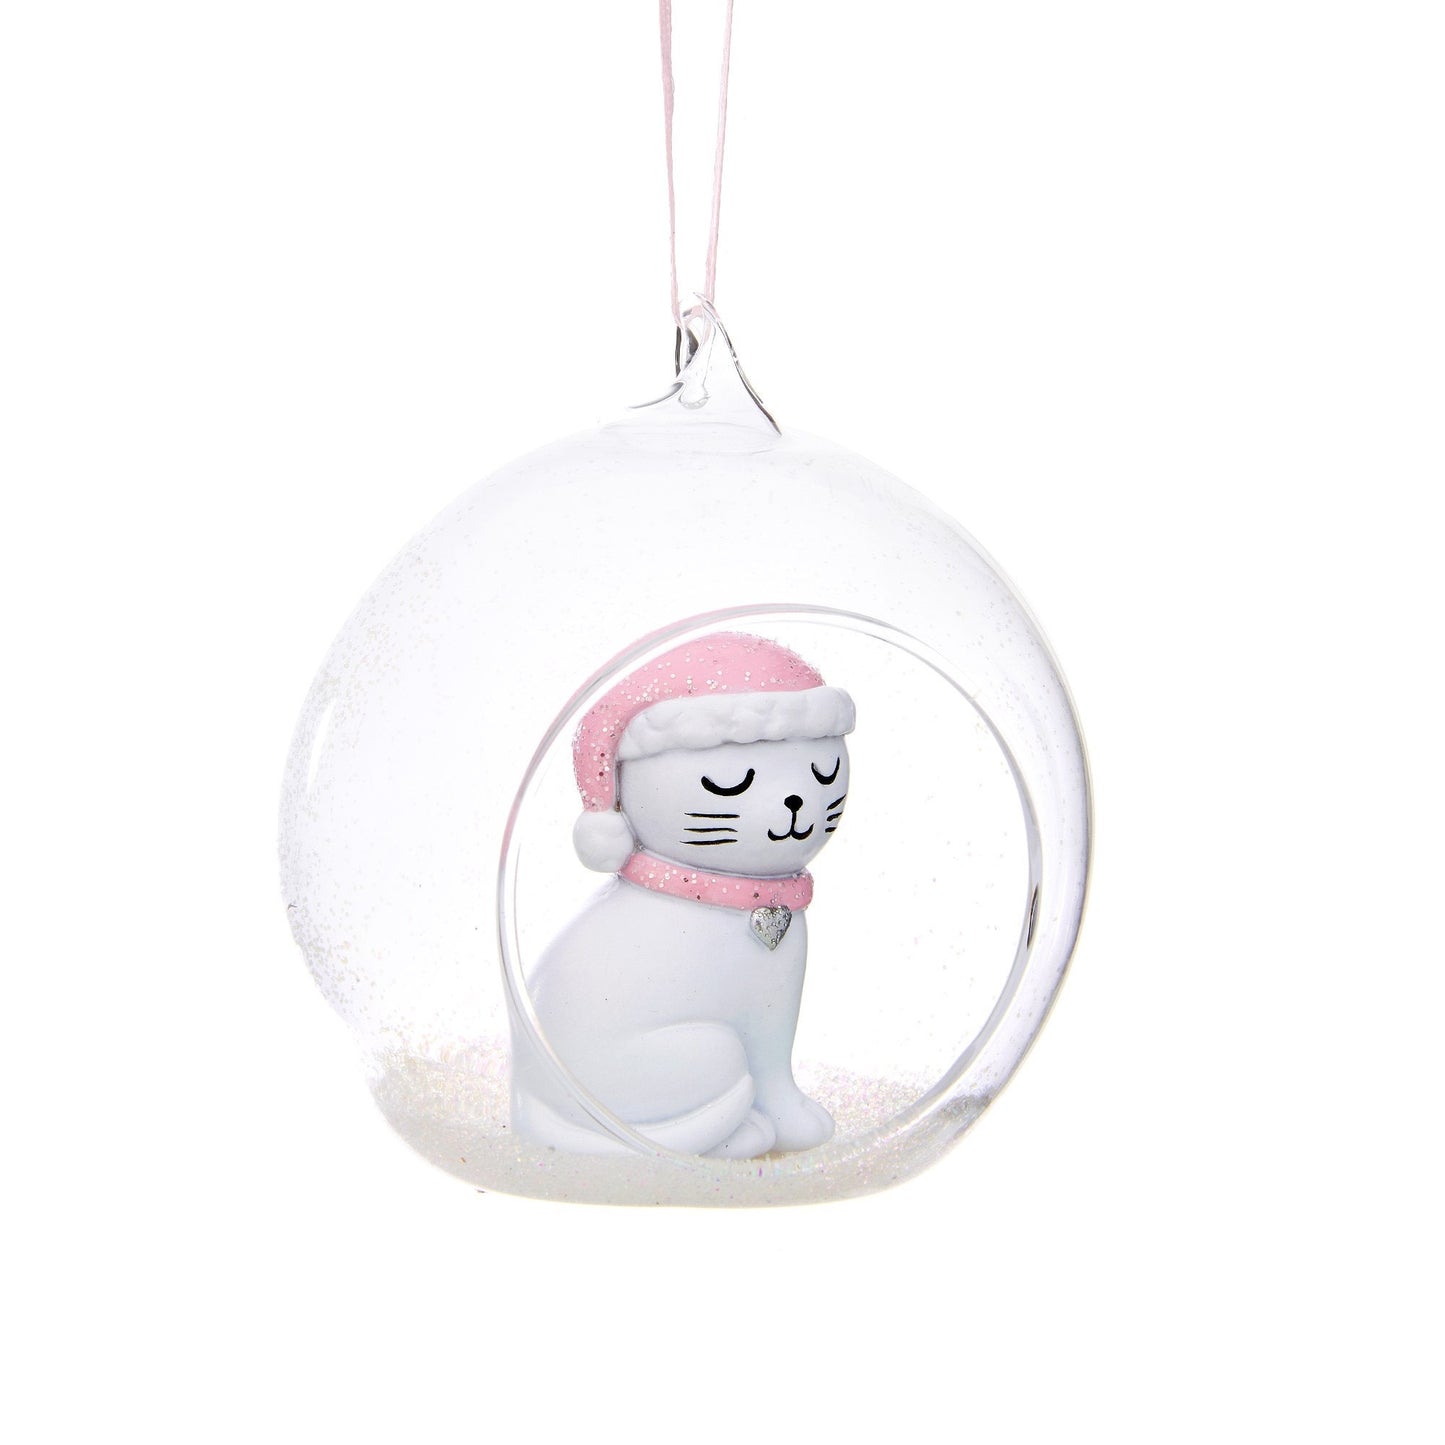 Hanging White Cat Hanging Bauble Christmas Tree Decoration